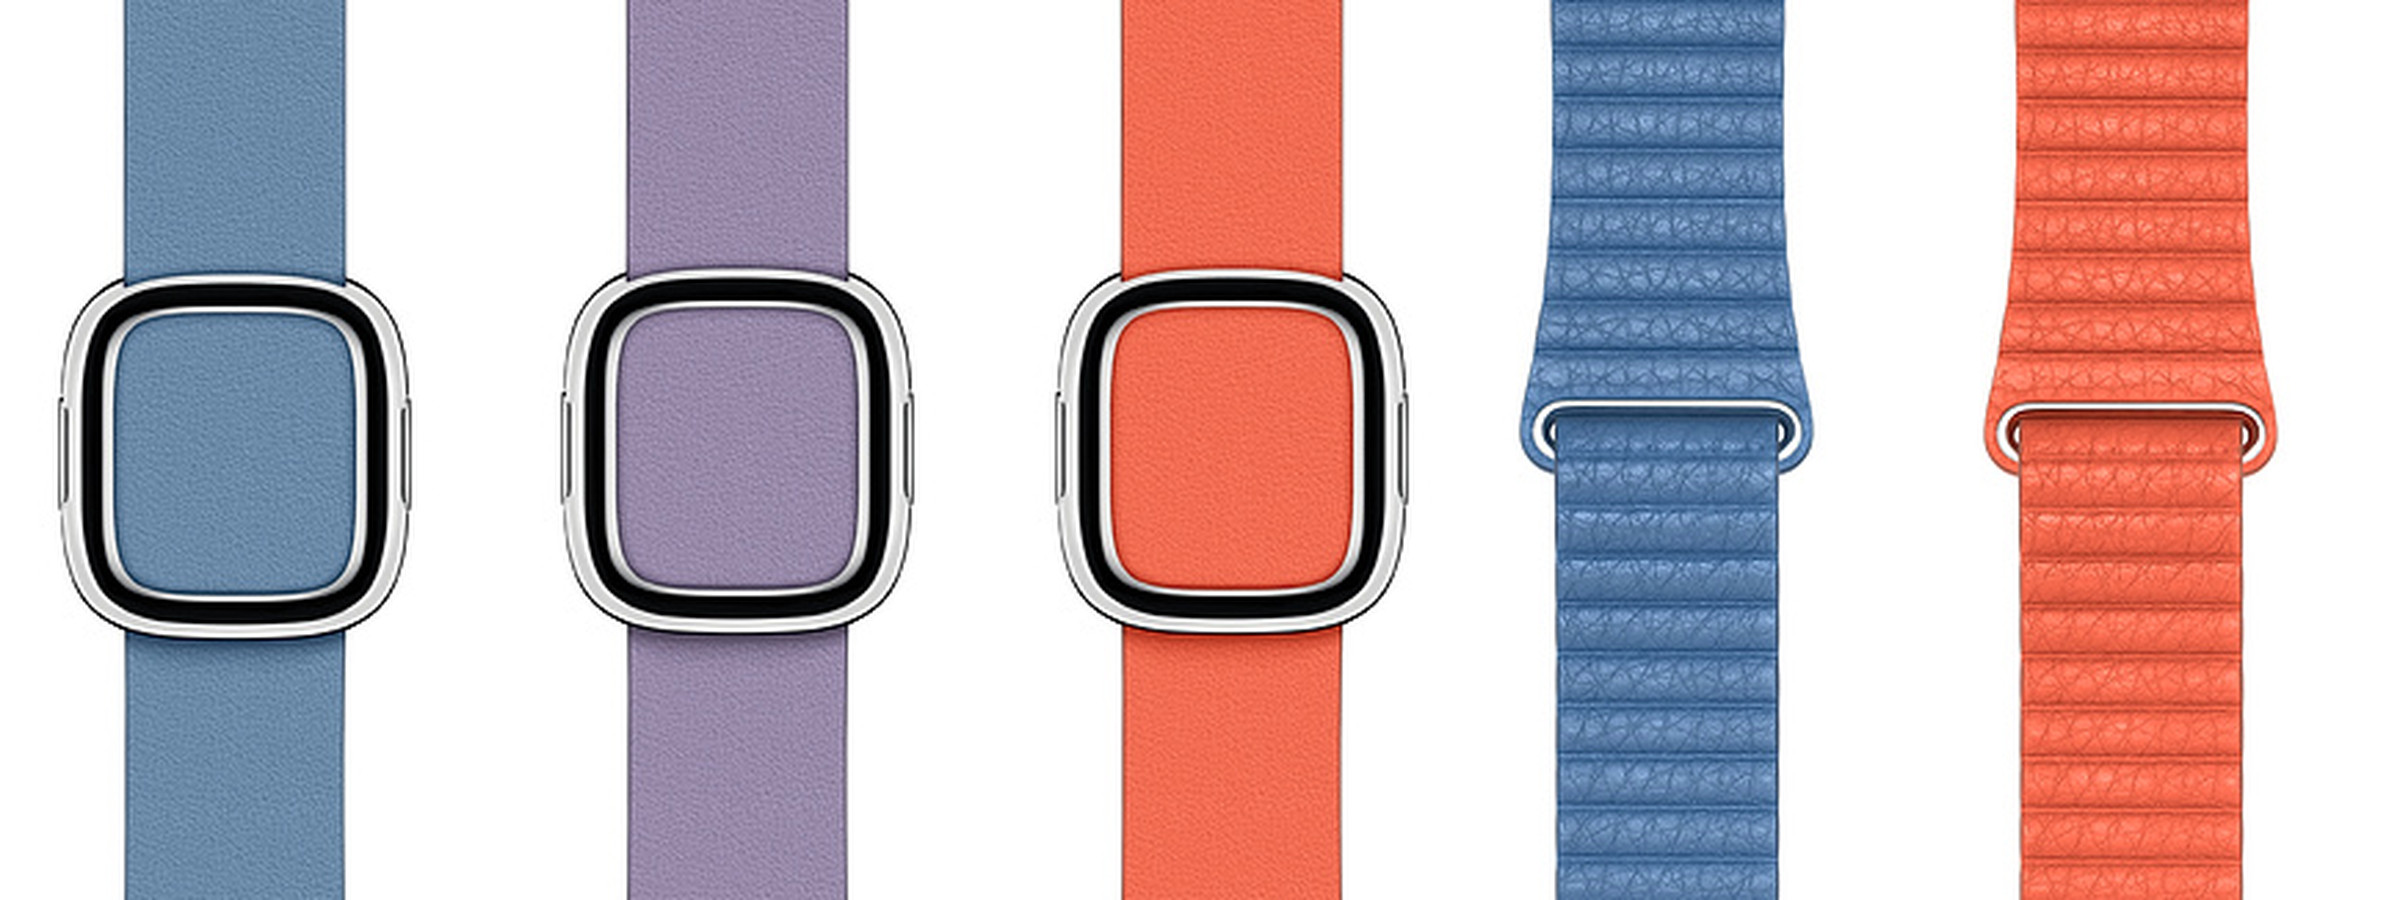 Modern Buckle in cornflower, lilac, and sunset; Leather Loops in cornflower and sunset.